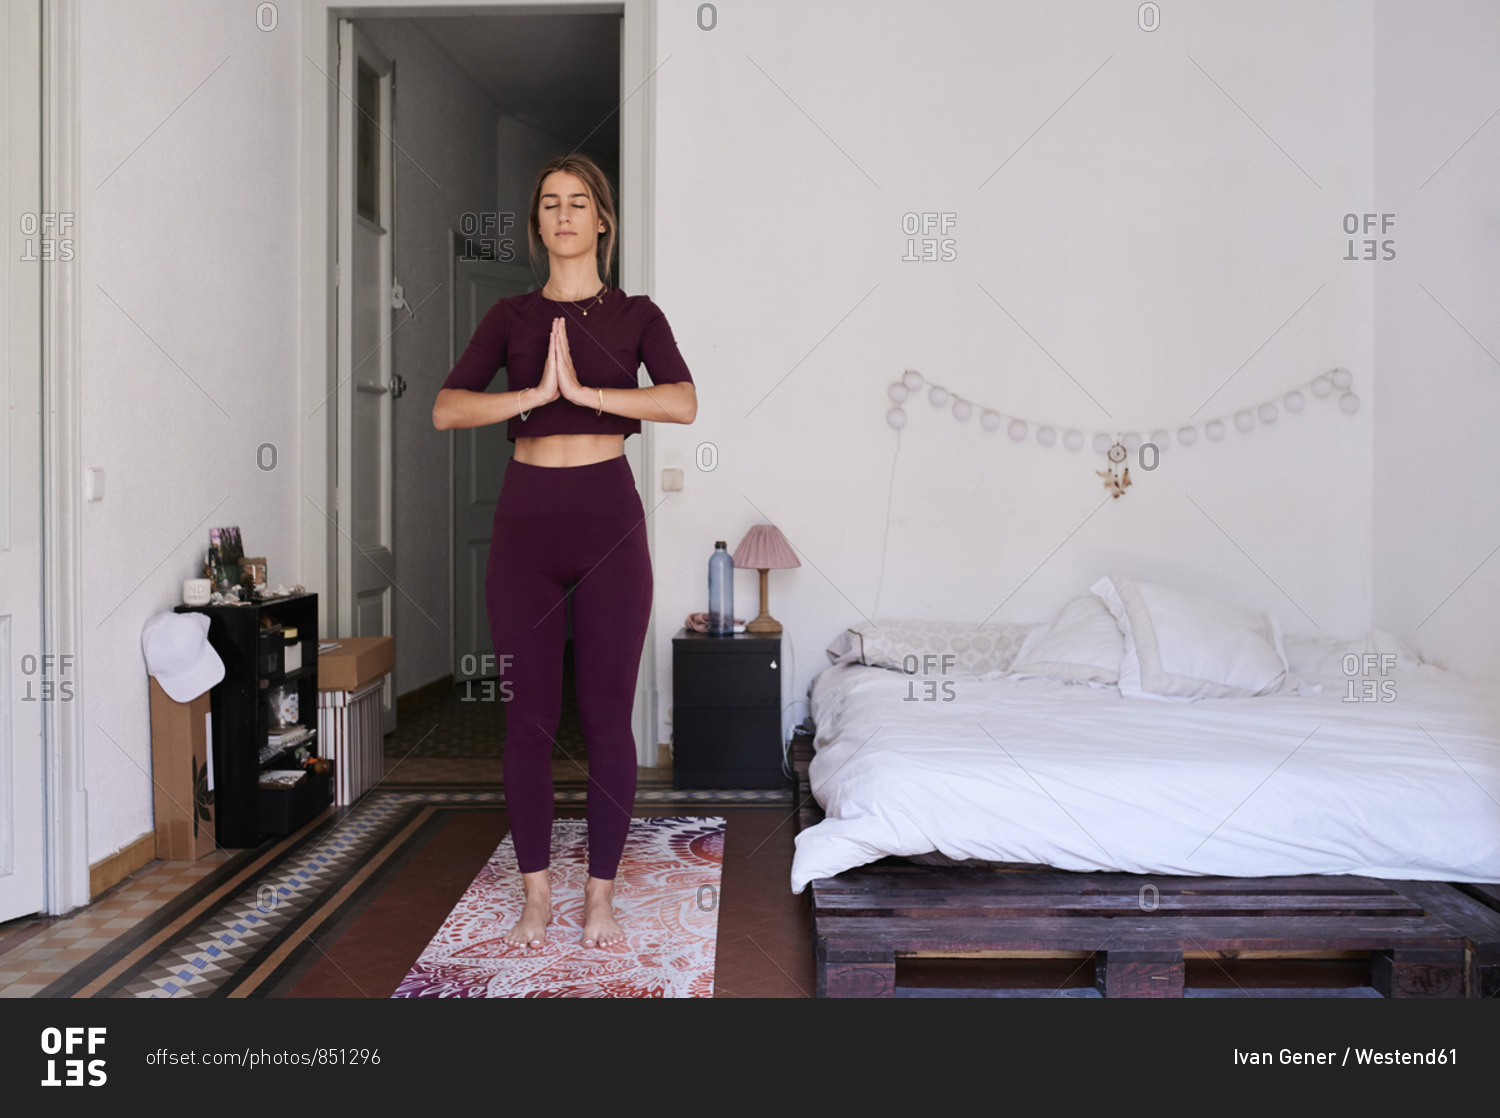 Young brunette woman practicing yoga in student dorm